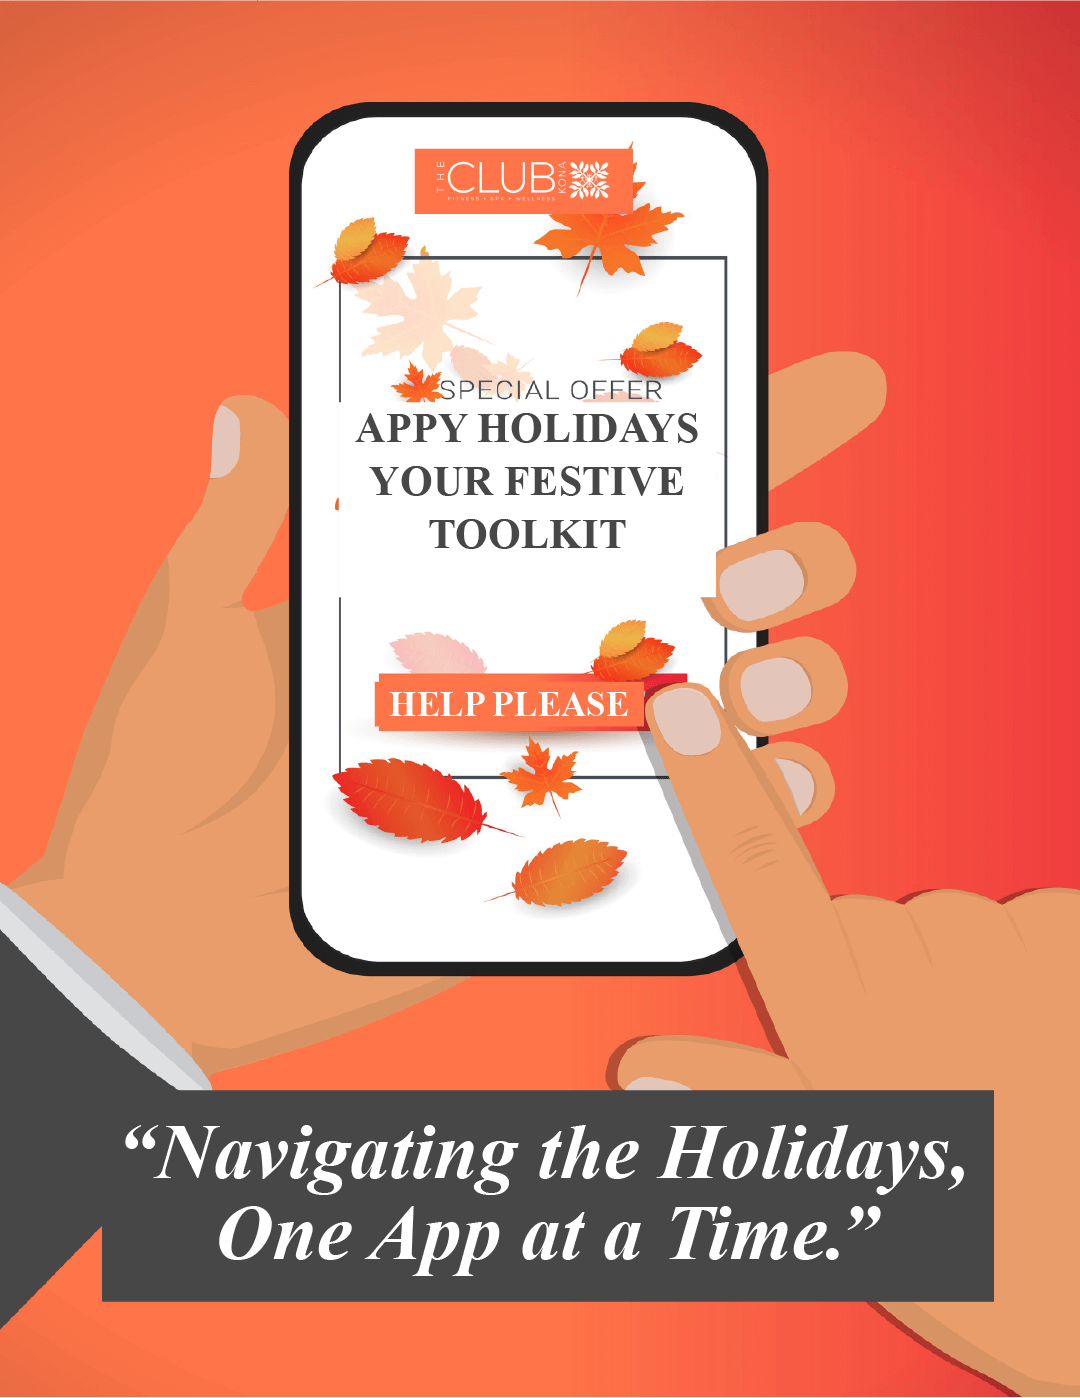 "Navigating the Holidays, One App at a Time"